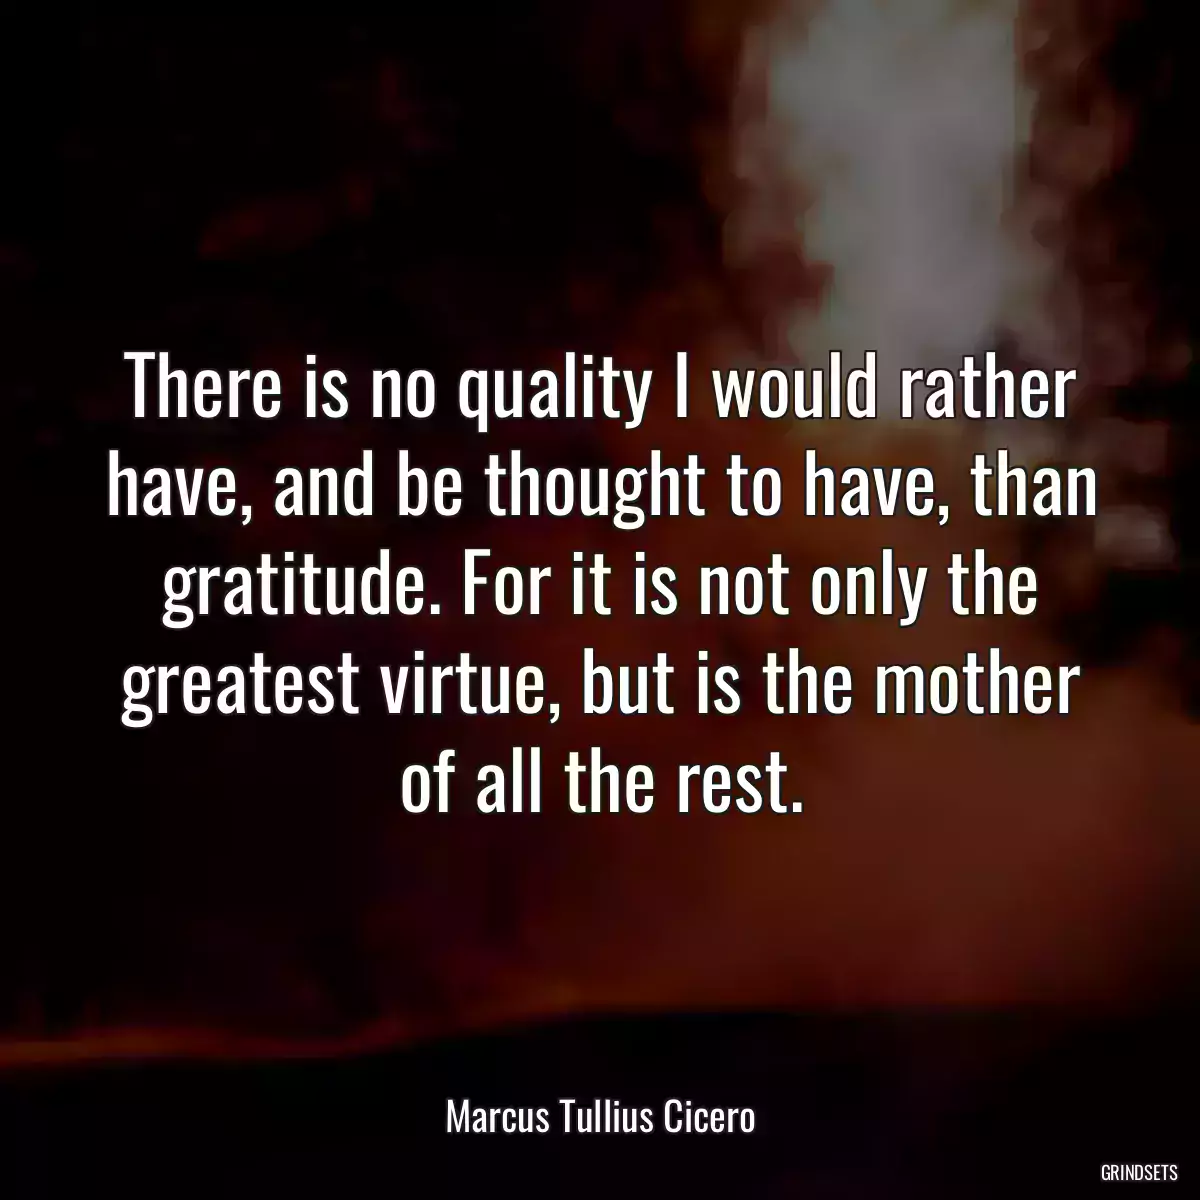 There is no quality I would rather have, and be thought to have, than gratitude. For it is not only the greatest virtue, but is the mother of all the rest.